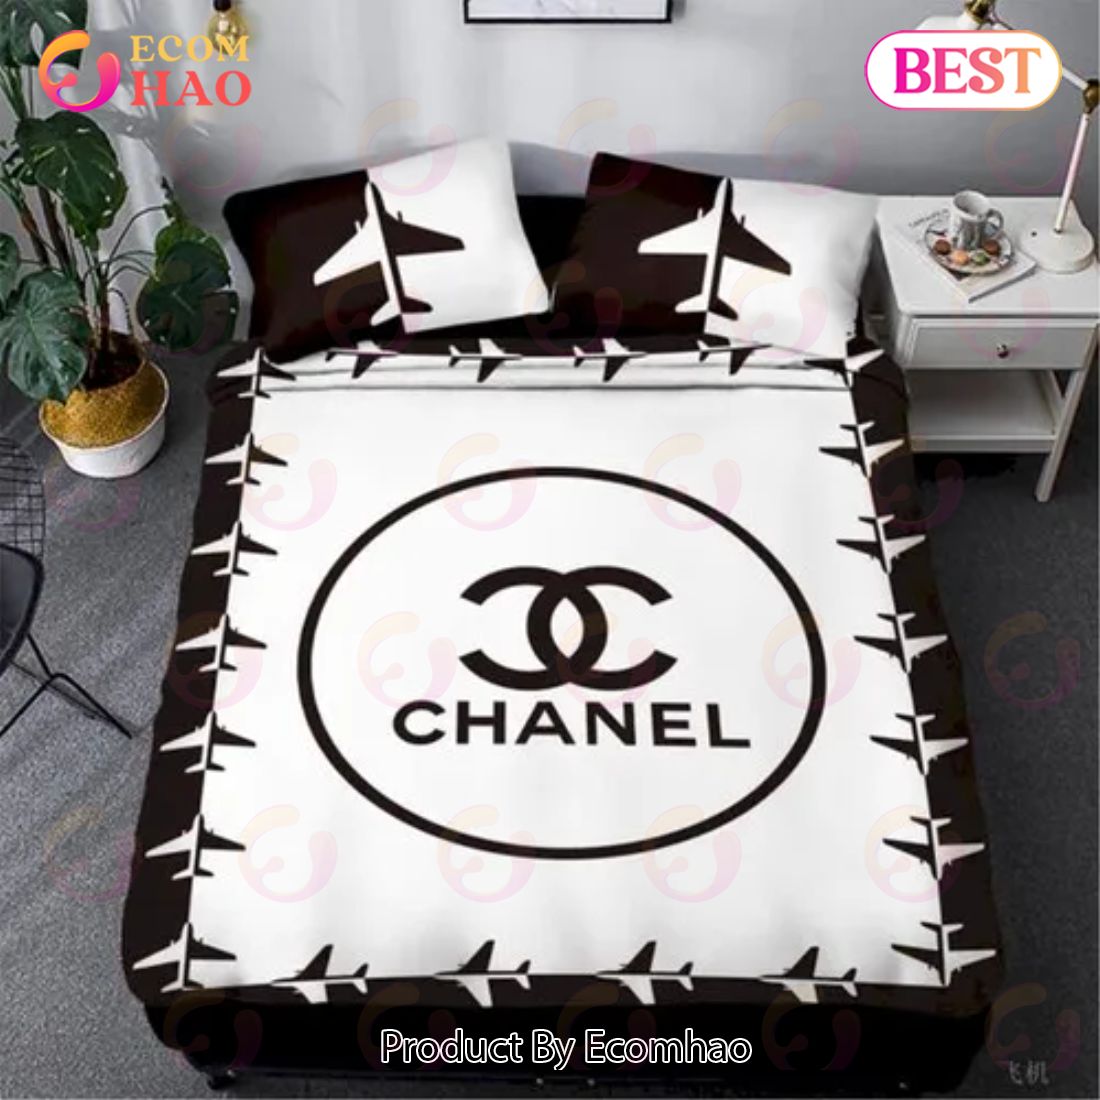 Chanel New Bedding 3D Printed Bedding Sets Quilt Sets Duvet Cover Luxury Brand Bedding Decor Bedroom Sets Best Luxury Bed Sets Gift Thankgivings And Christmas